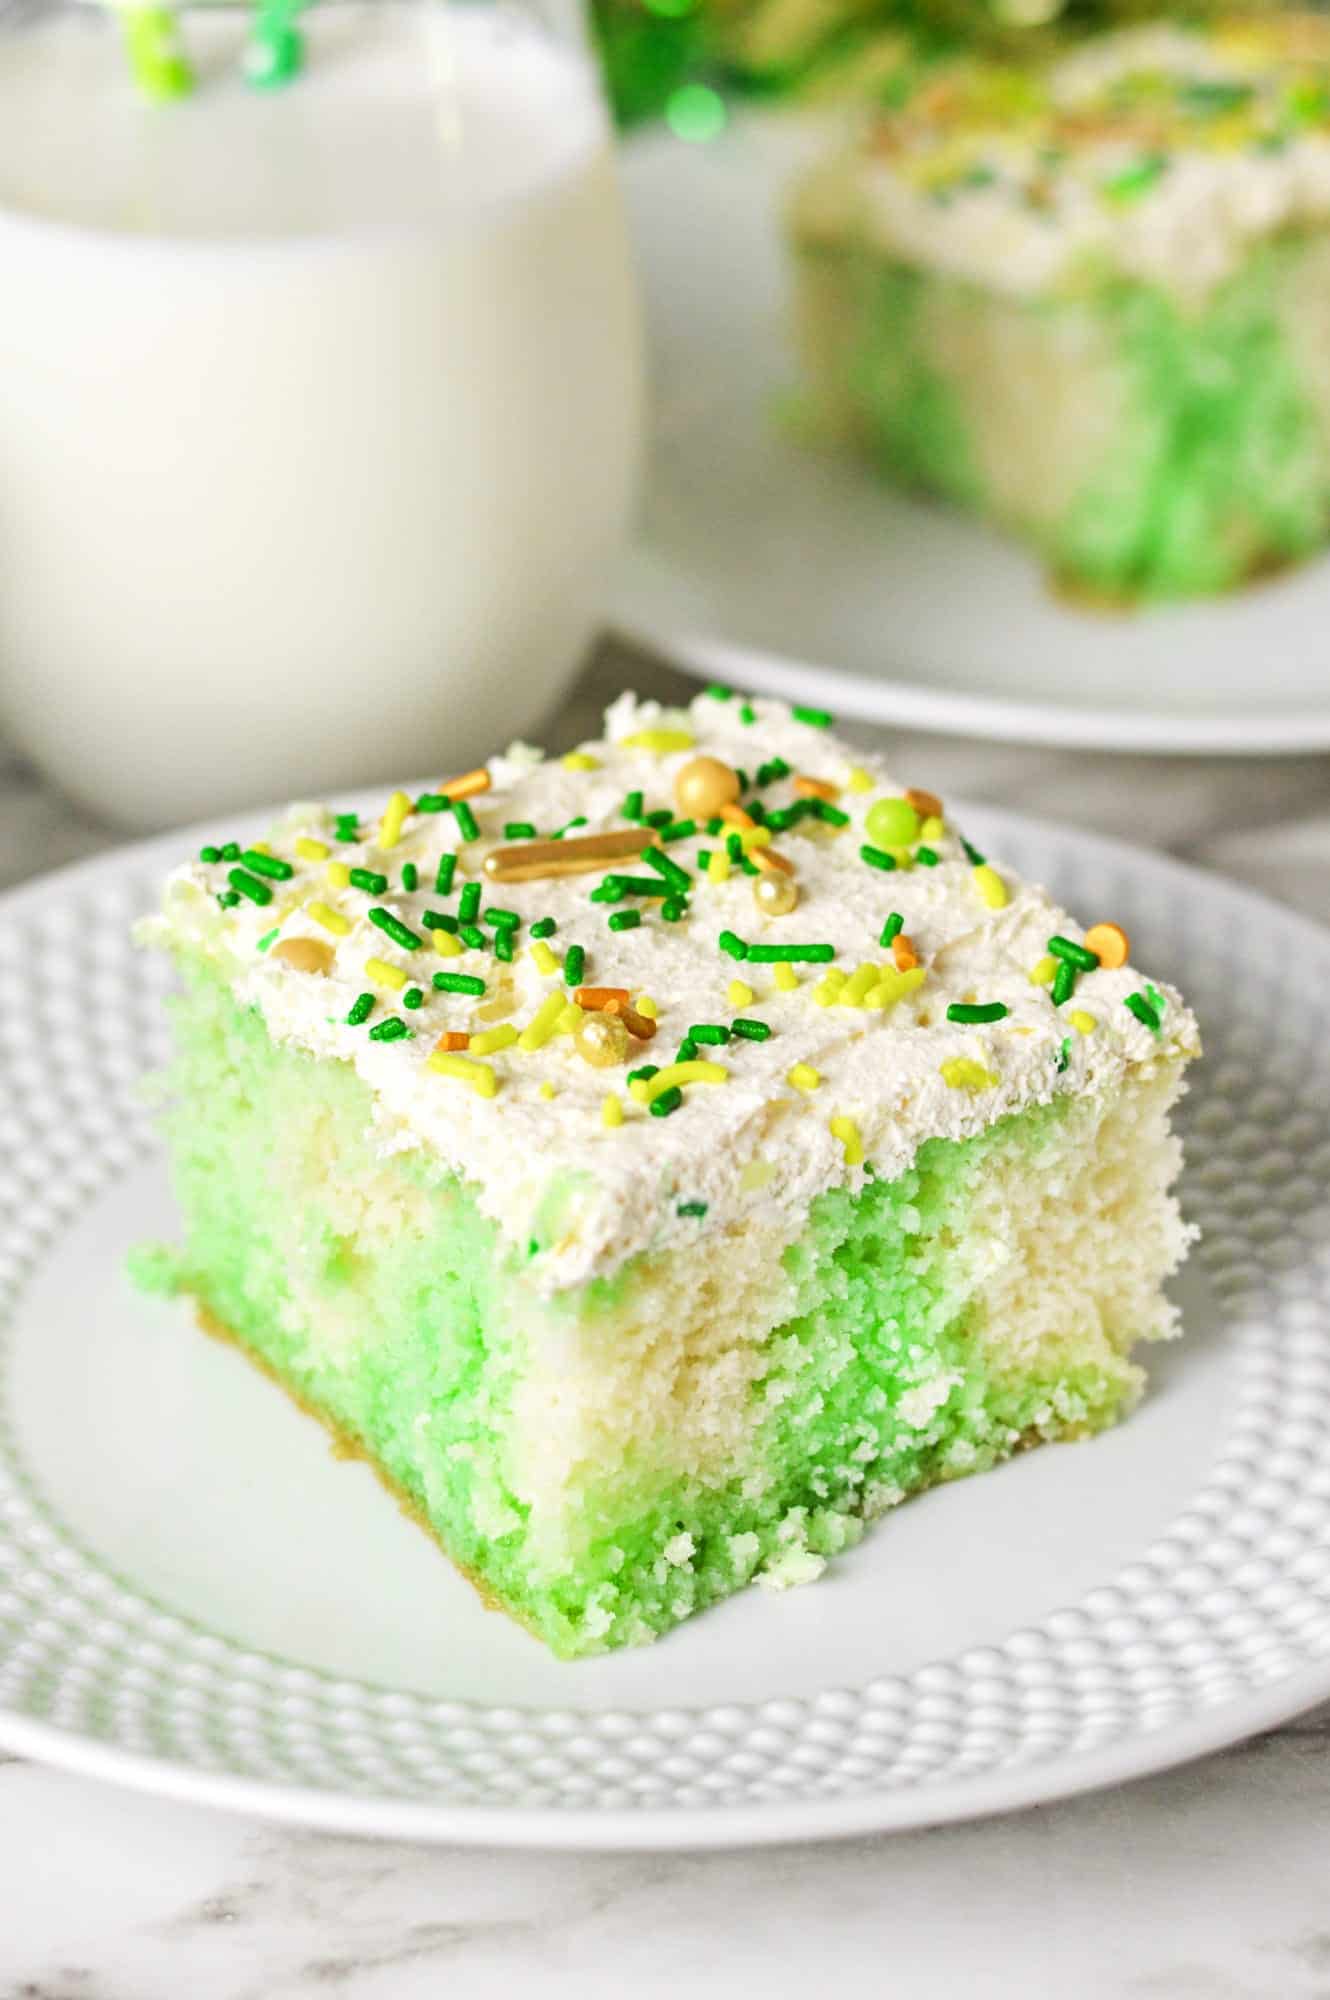 A slice of lime jello poke cake on a small white plate, decorated with St. patrick's day sprinkles.